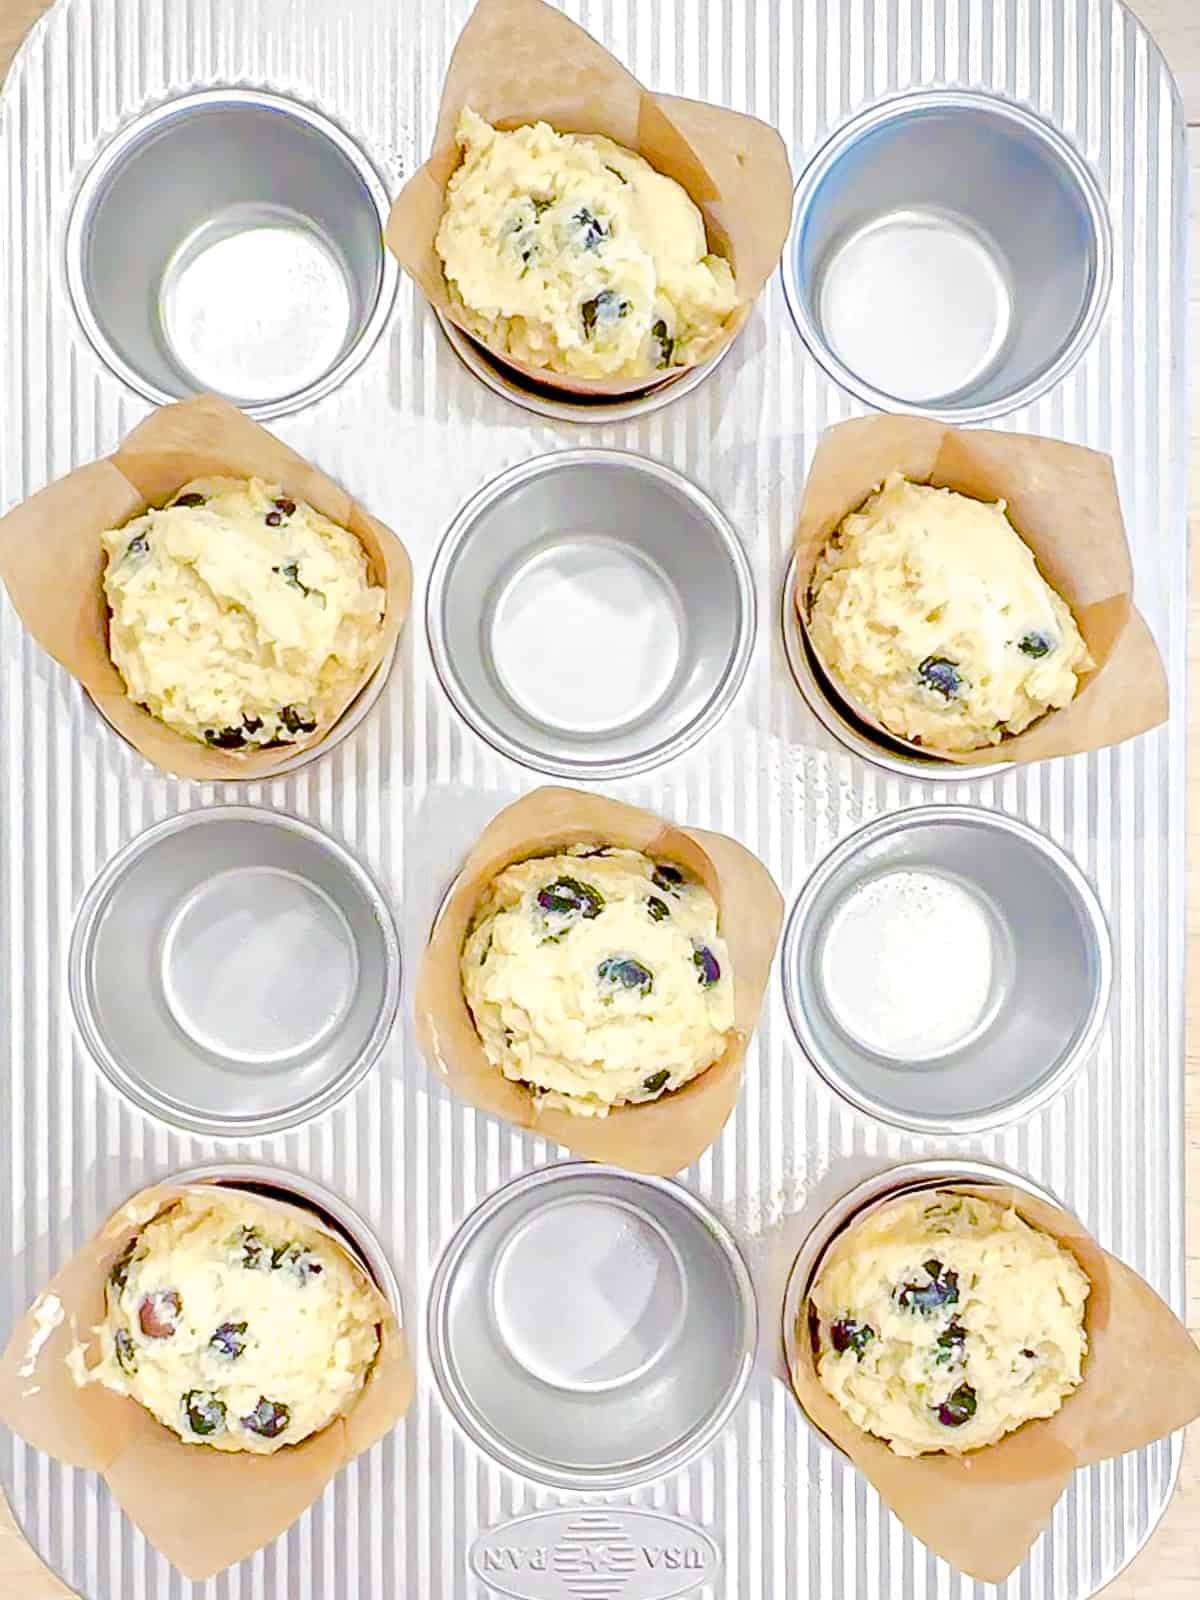 Blueberry muffin batter scooped into muffin liners.